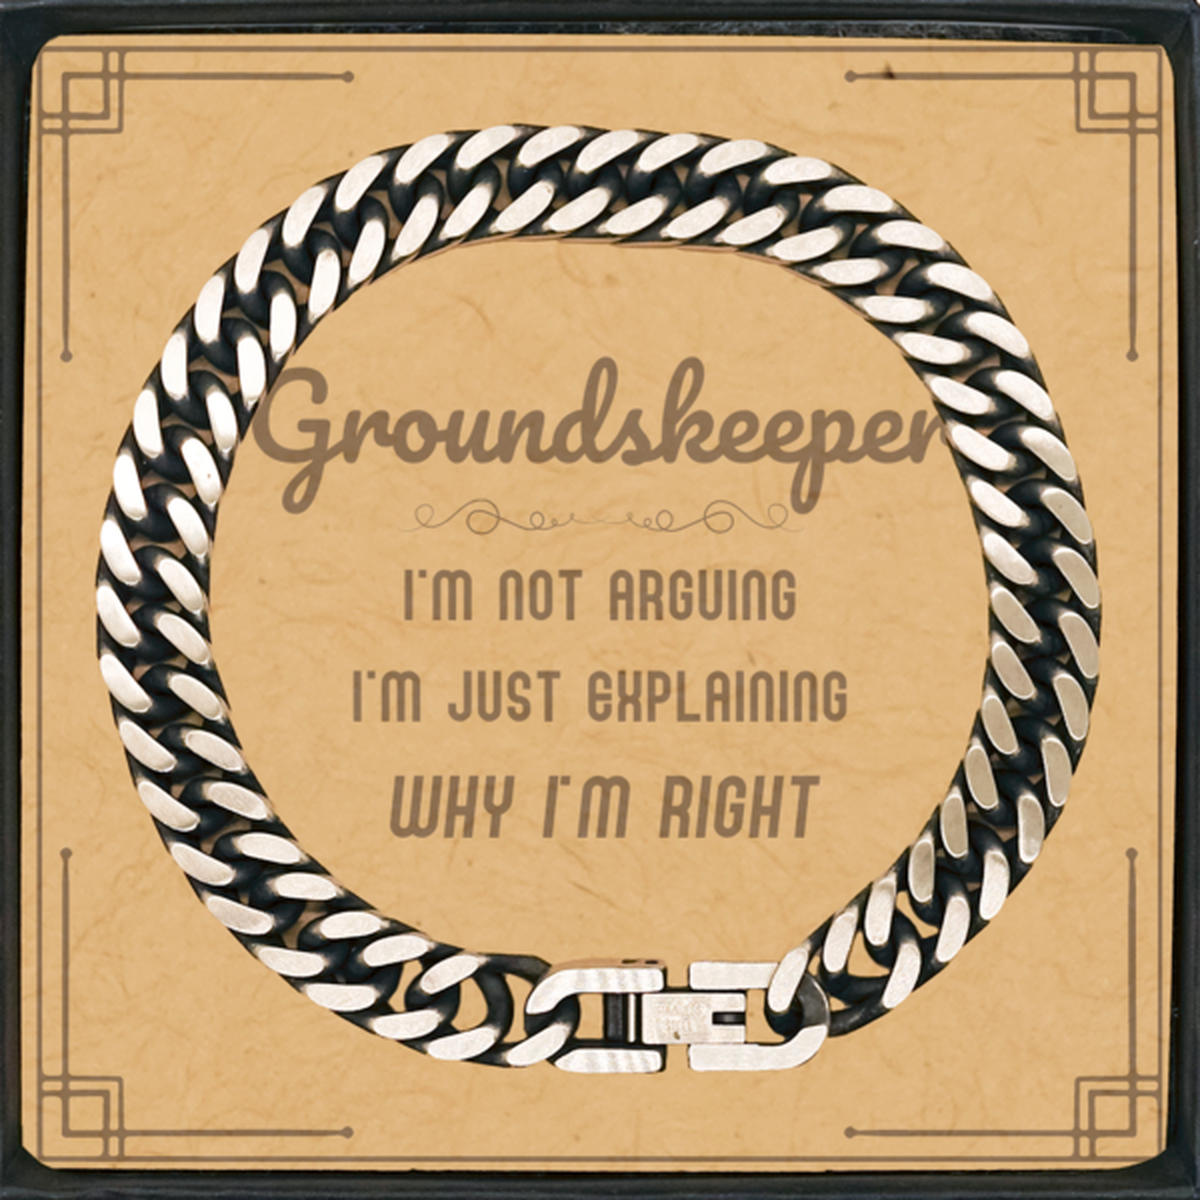 Groundskeeper I'm not Arguing. I'm Just Explaining Why I'm RIGHT Cuban Link Chain Bracelet, Funny Saying Quote Groundskeeper Gifts For Groundskeeper Message Card Graduation Birthday Christmas Gifts for Men Women Coworker